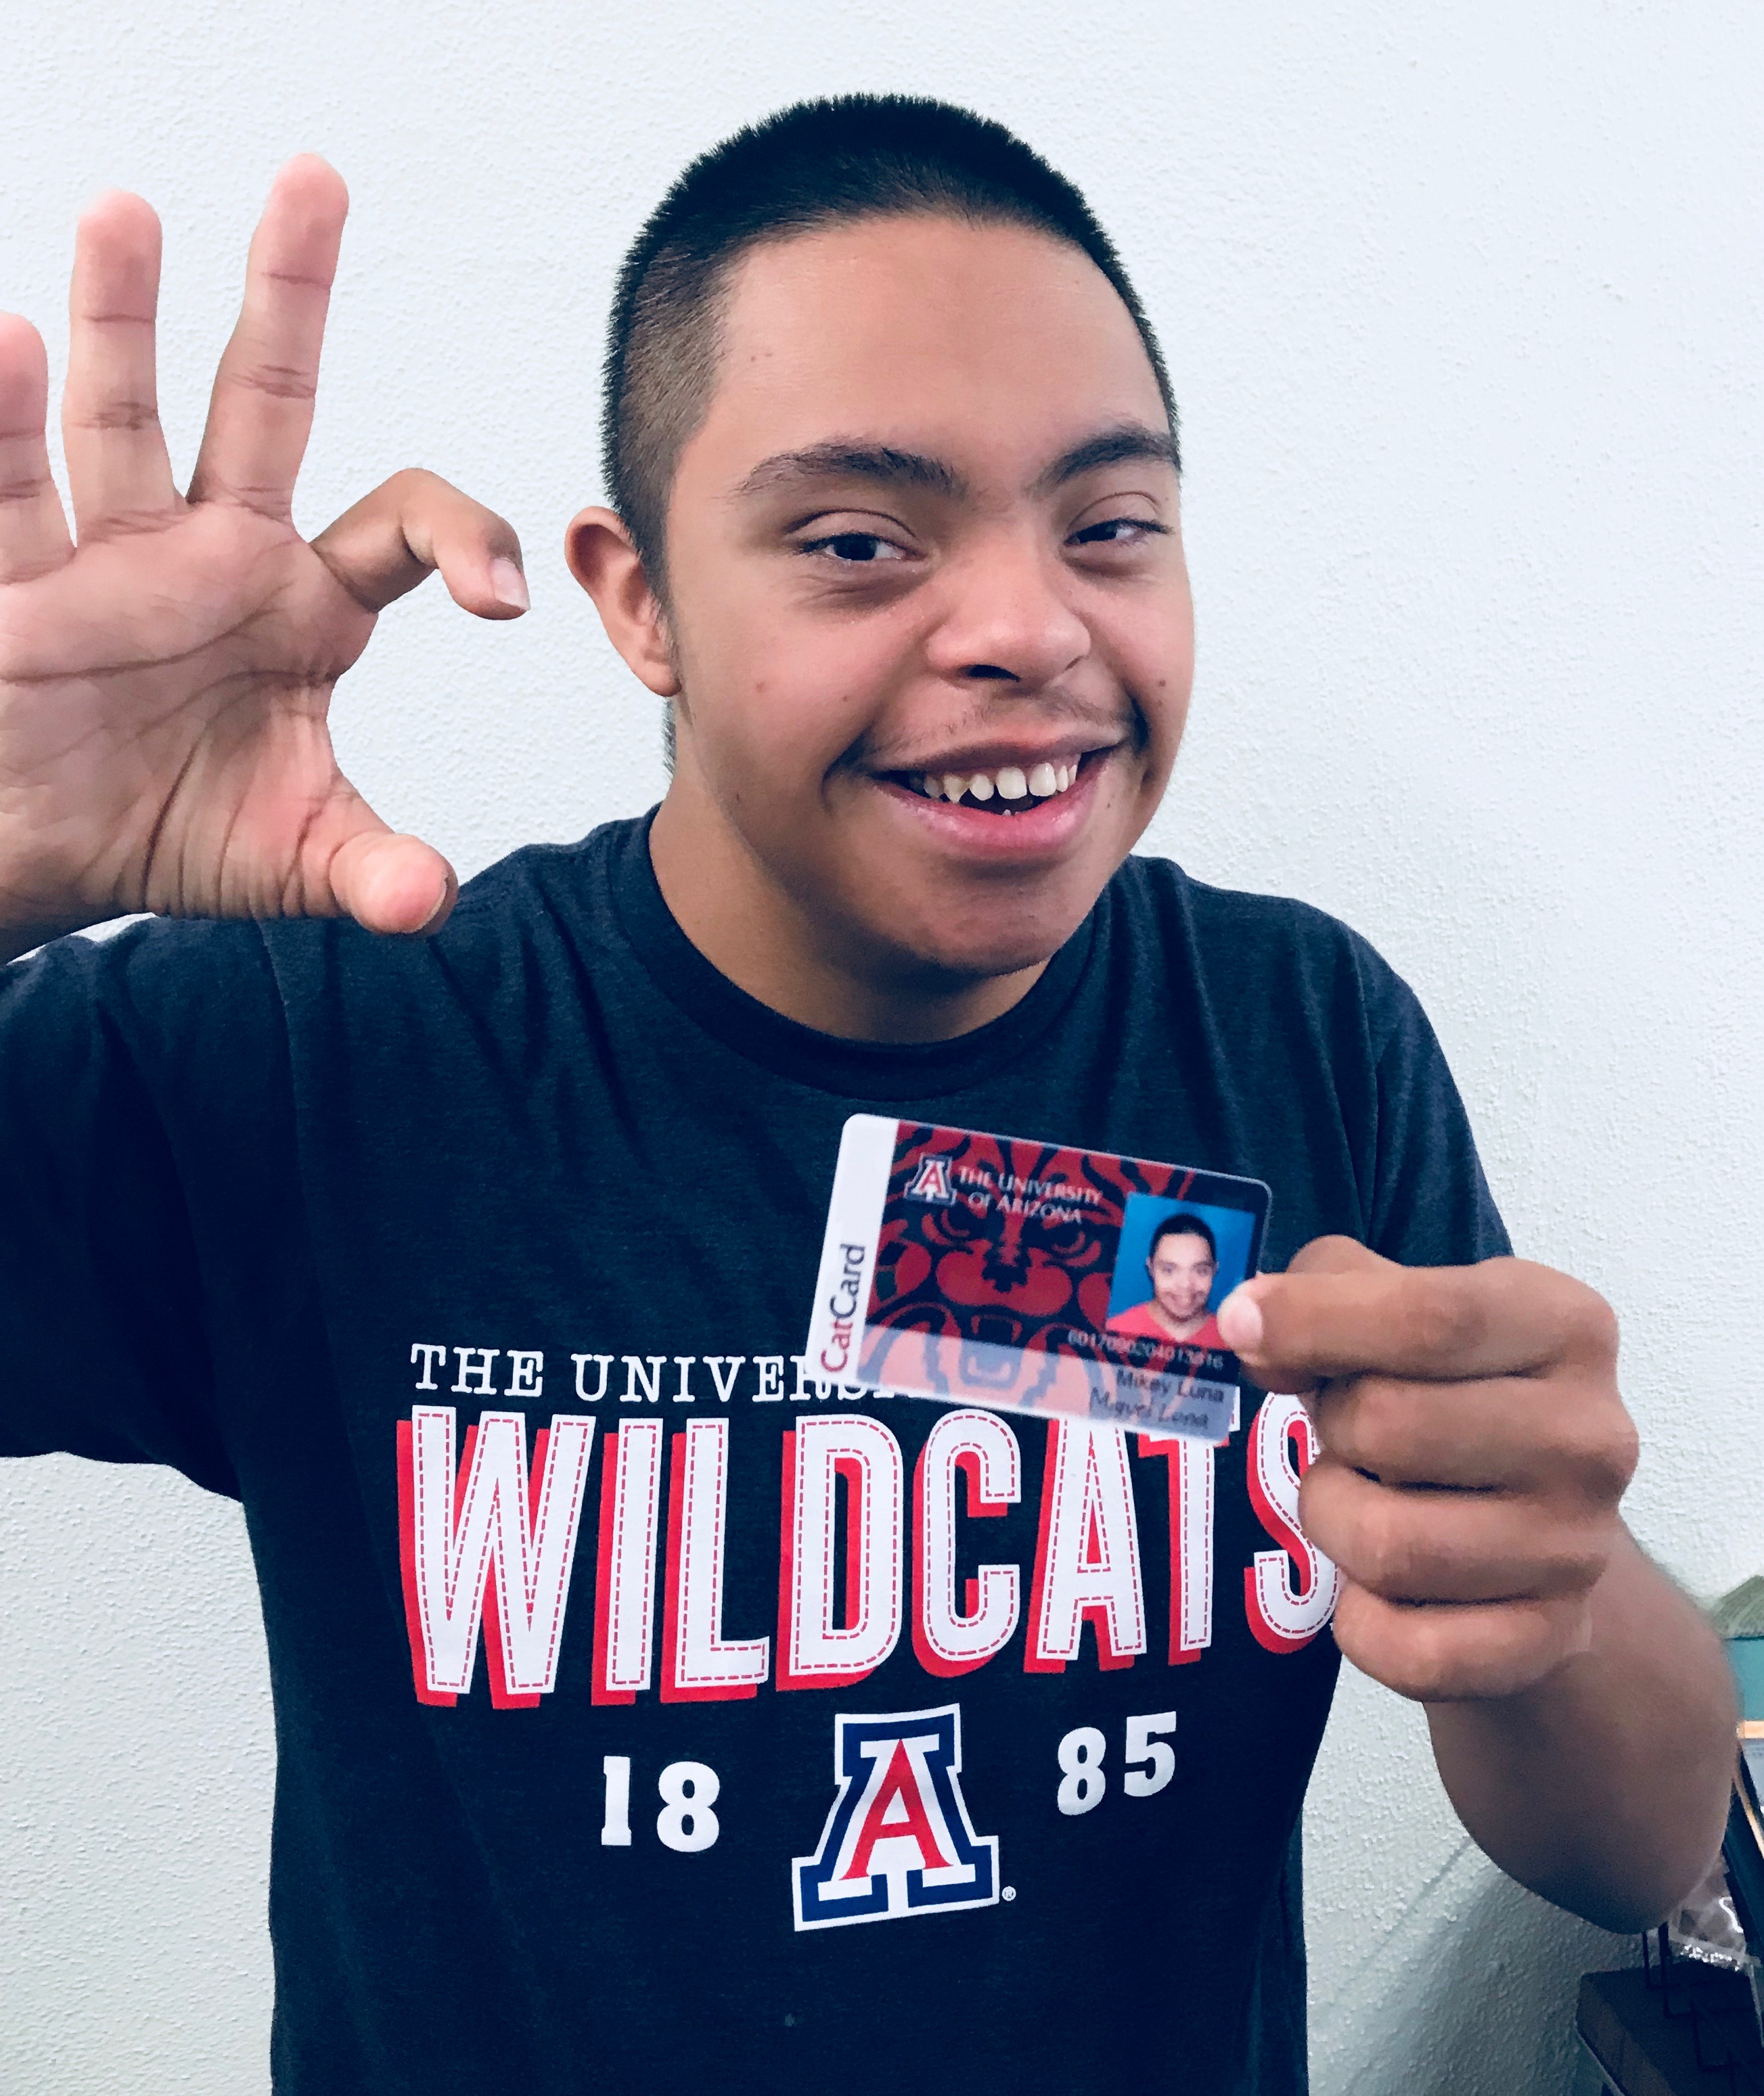 student holding cat card and making wildcat symbol with hand